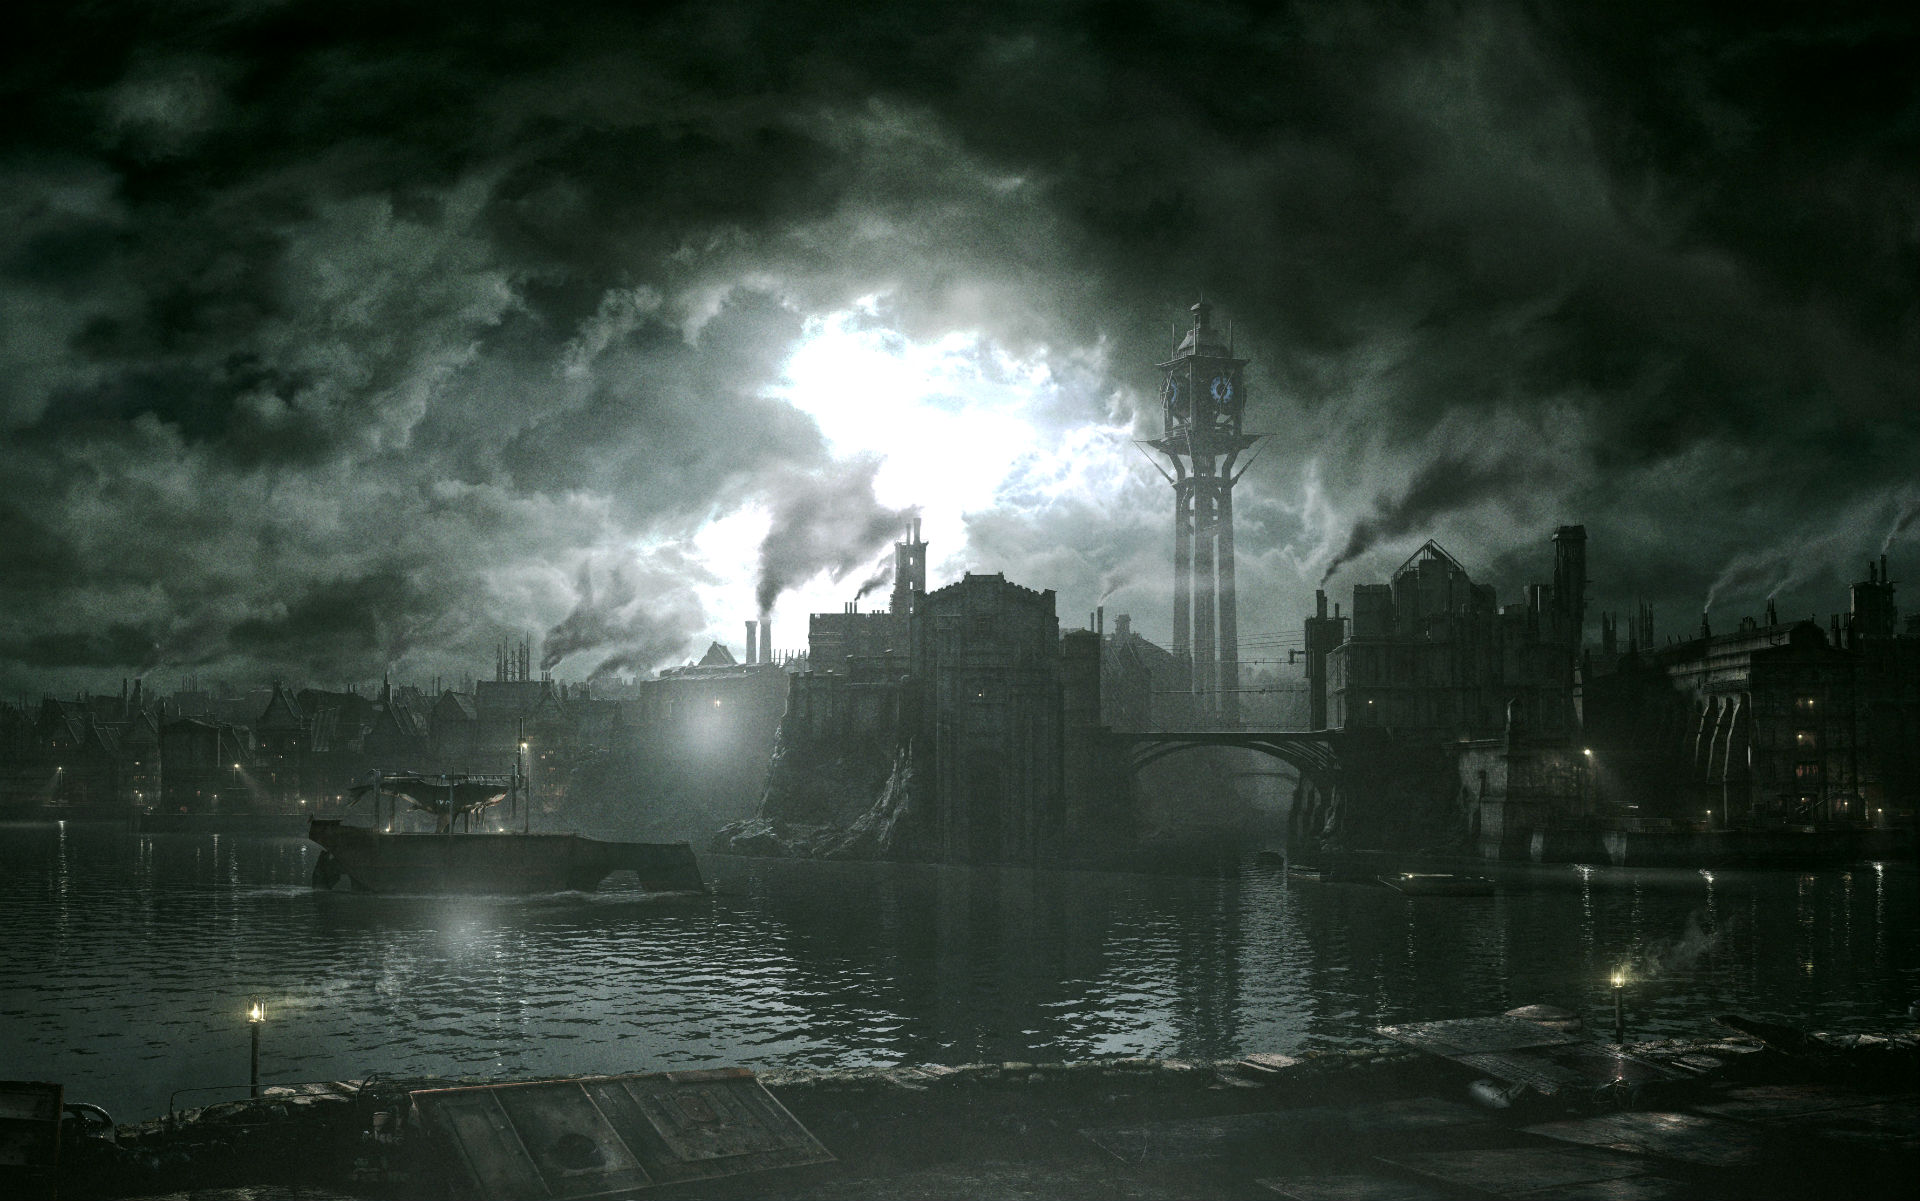 dishonored, video game